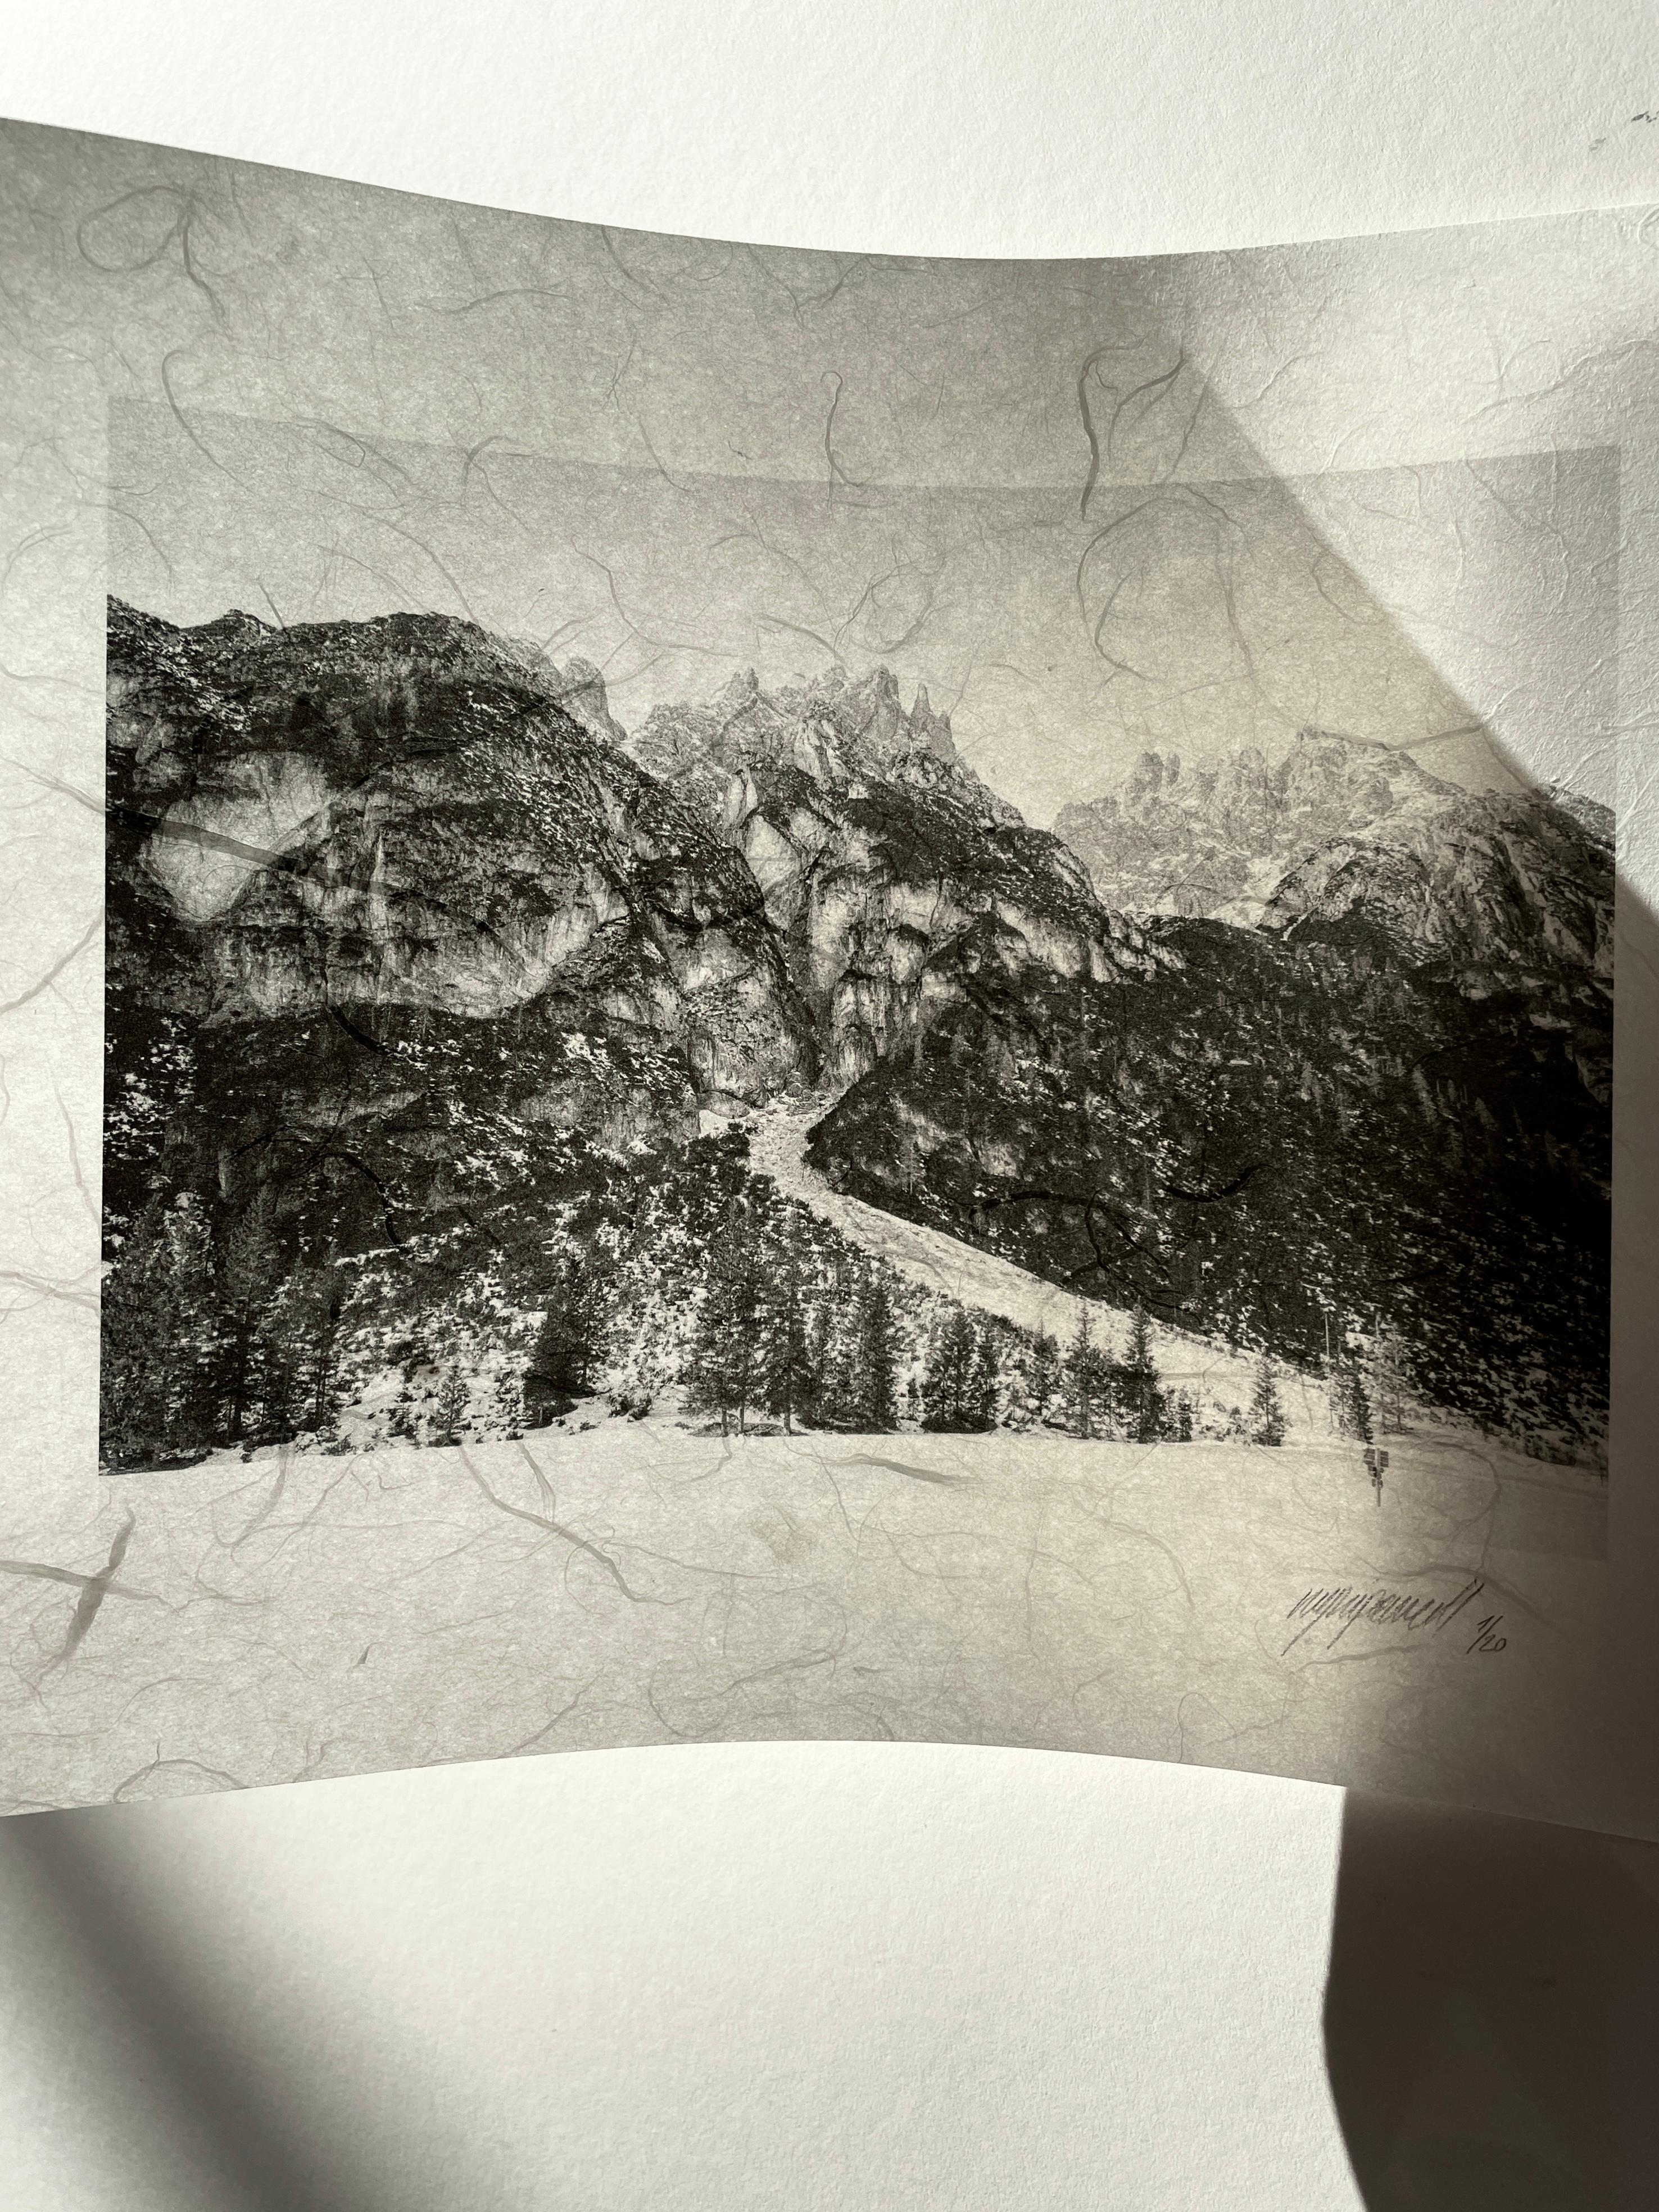 Dolomites No.3, Analogue Black and White Mountain Photography, Ltd. 20 For Sale 2